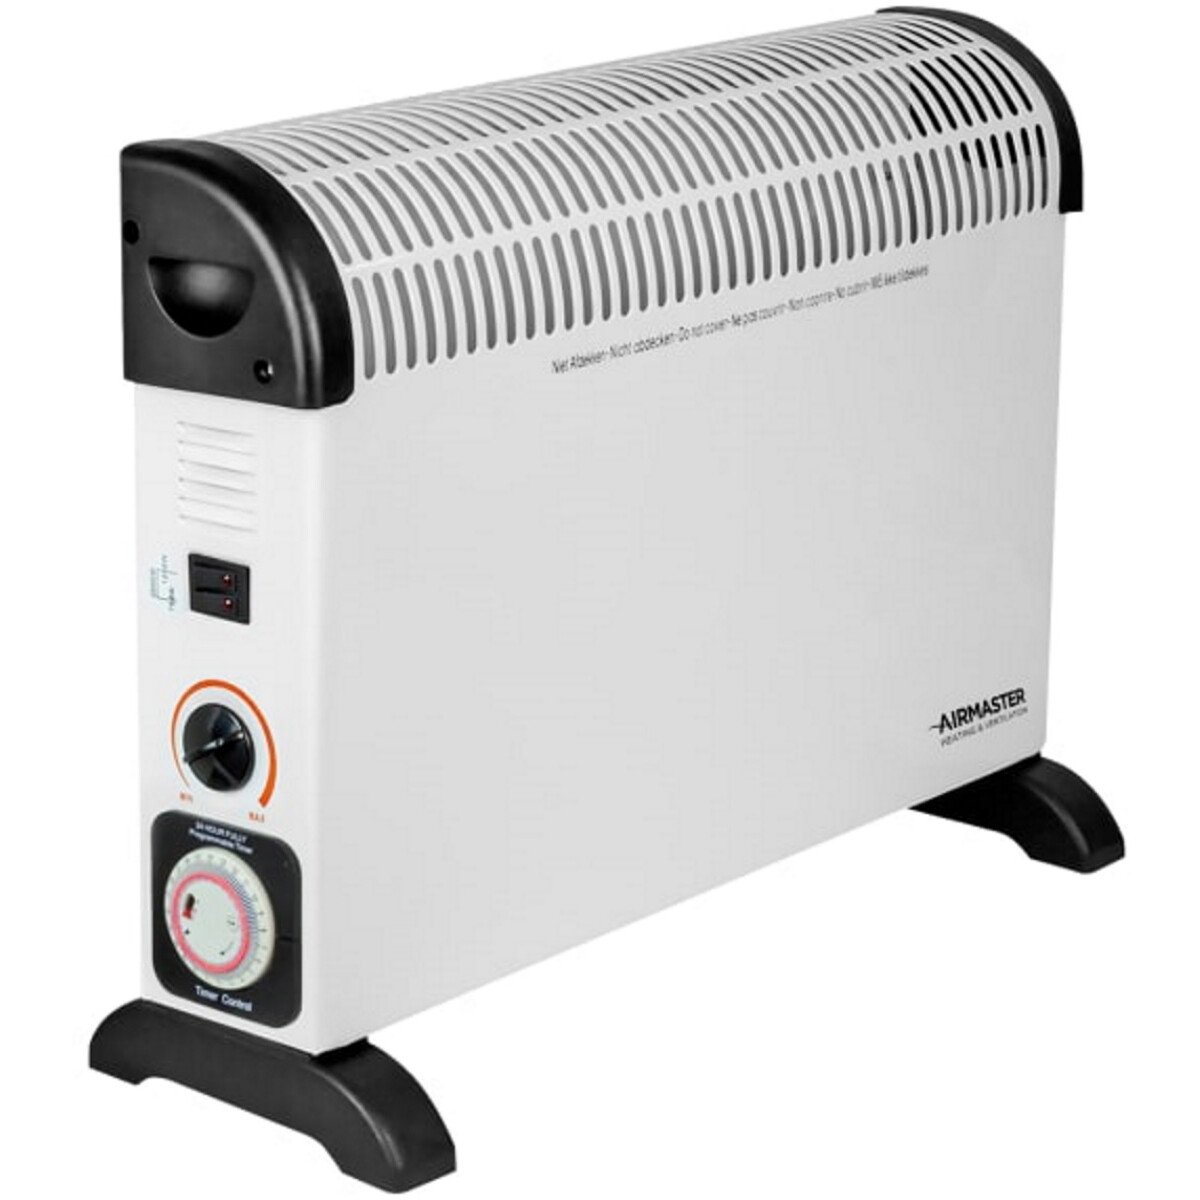 Airmaster HC2TIM Convector Heater 2.0kW with Timer AIRHC2TIM